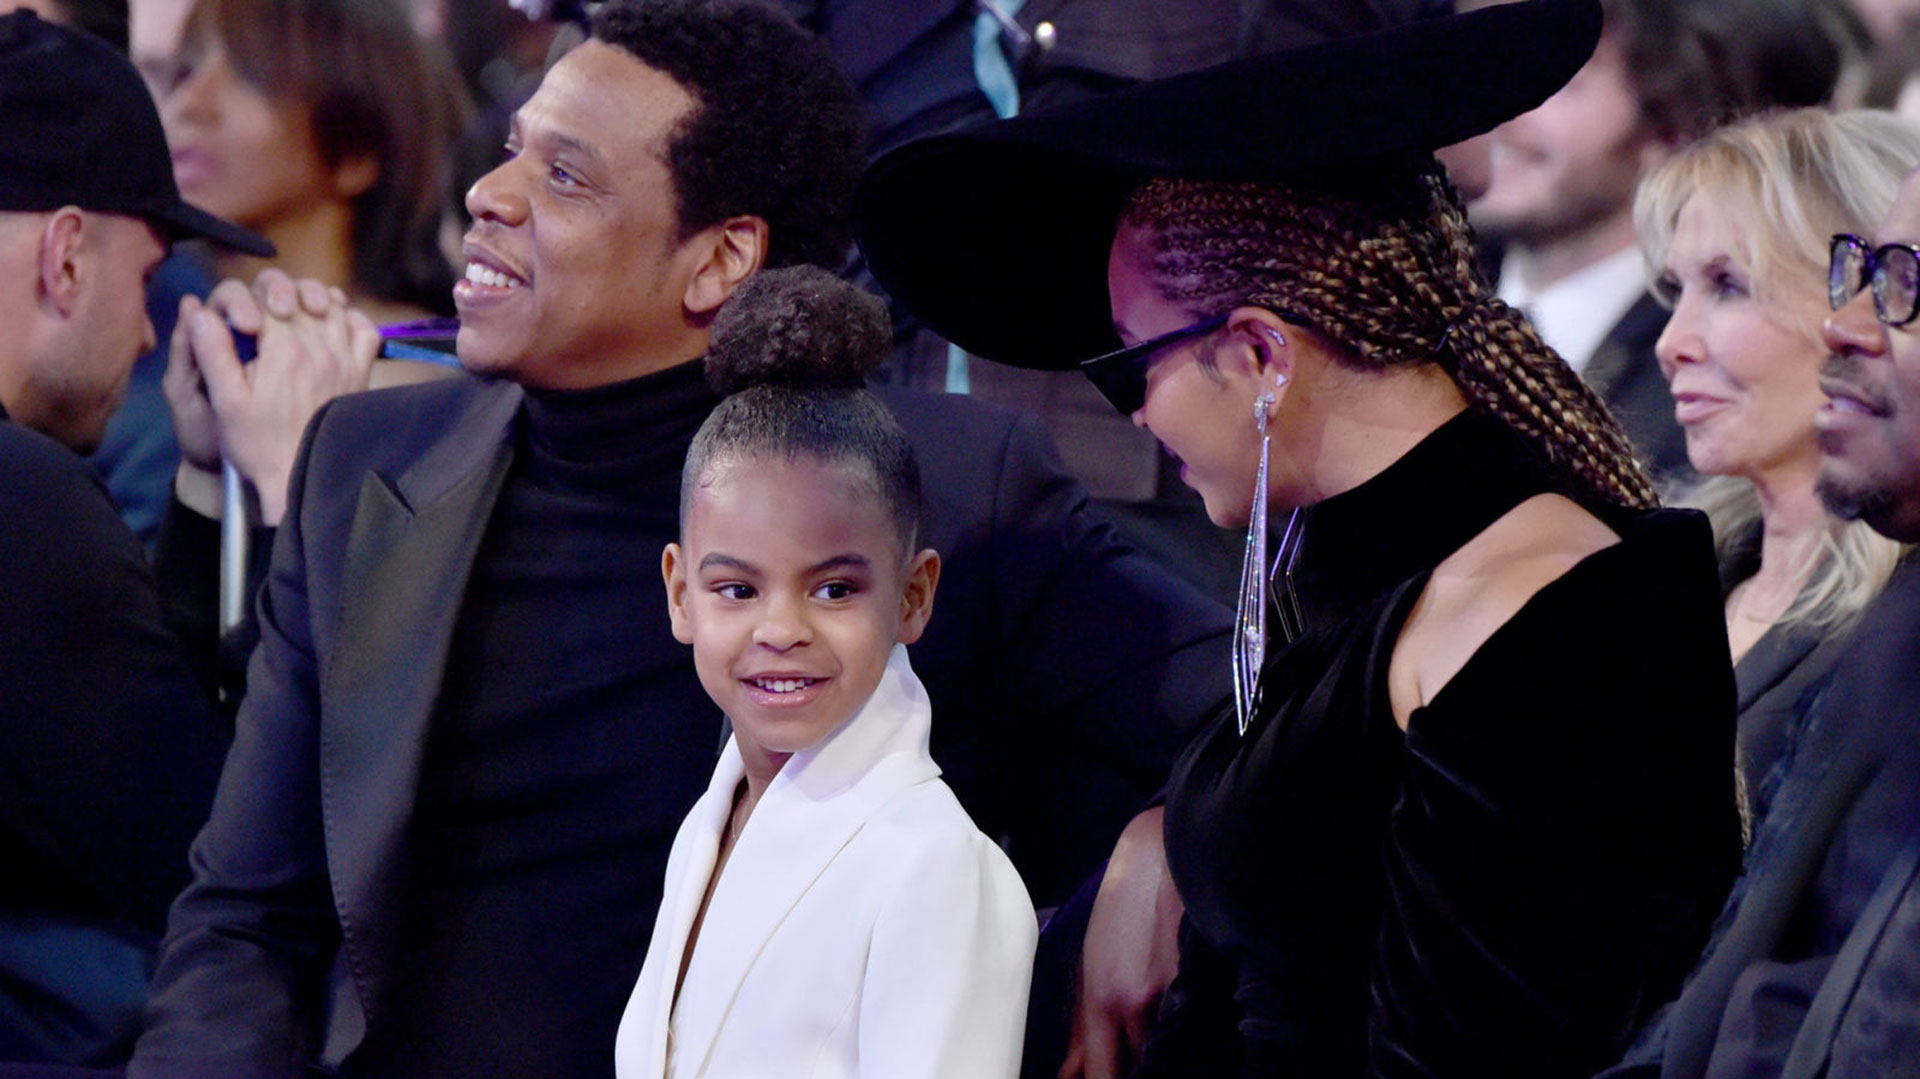 Blue Ivy is the eldest daughter of Beyoncé and Jay-Z.